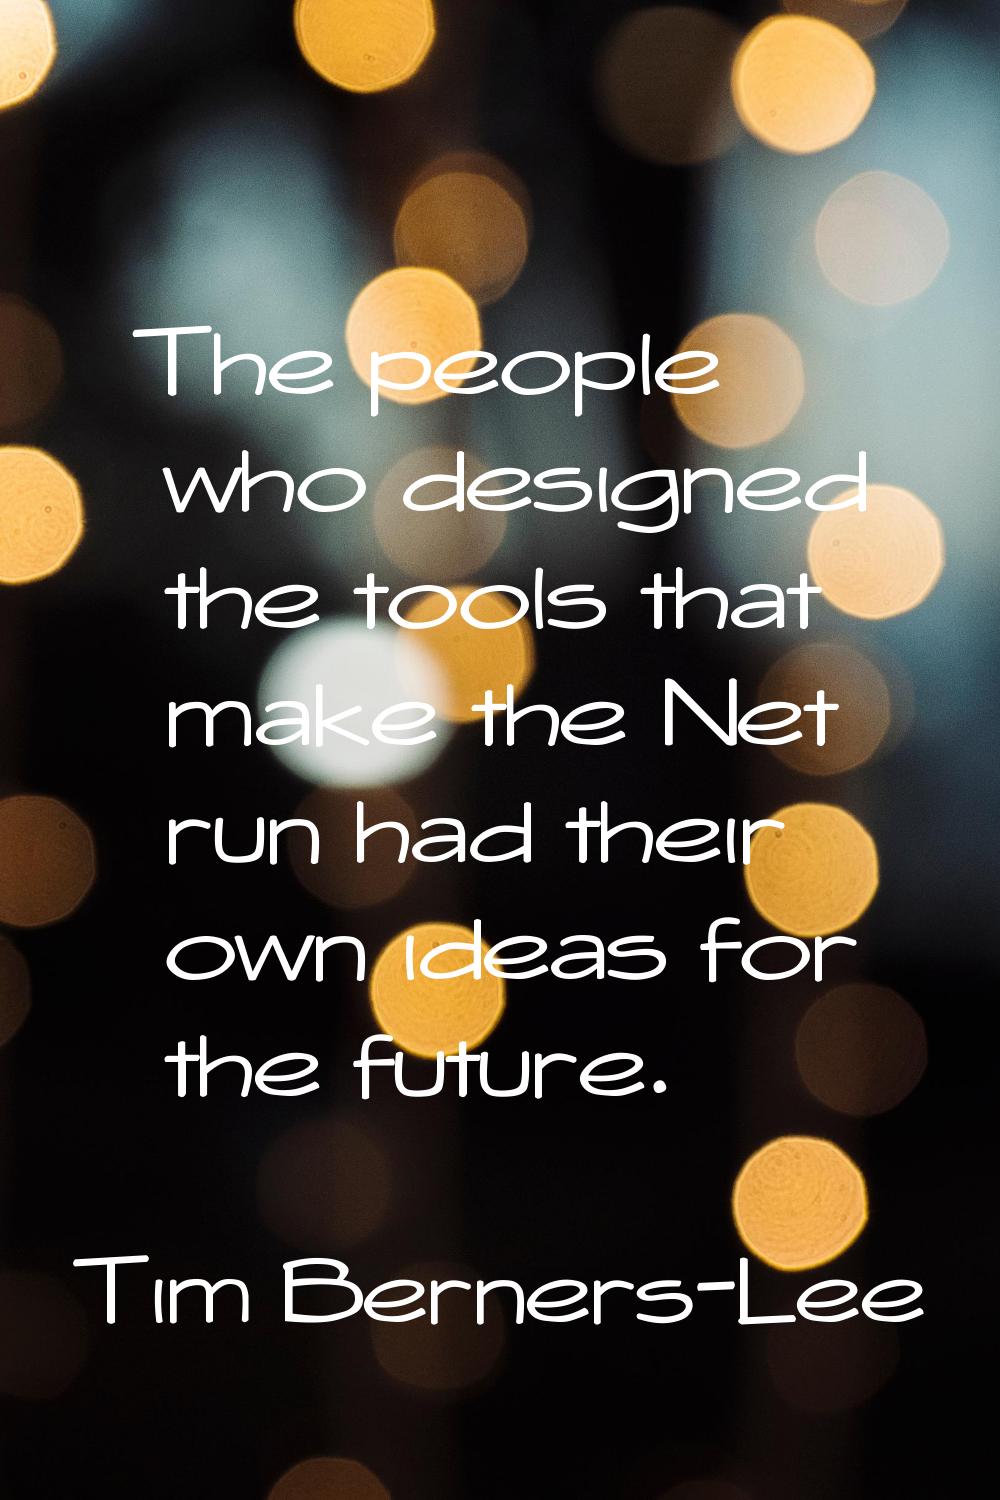 The people who designed the tools that make the Net run had their own ideas for the future.